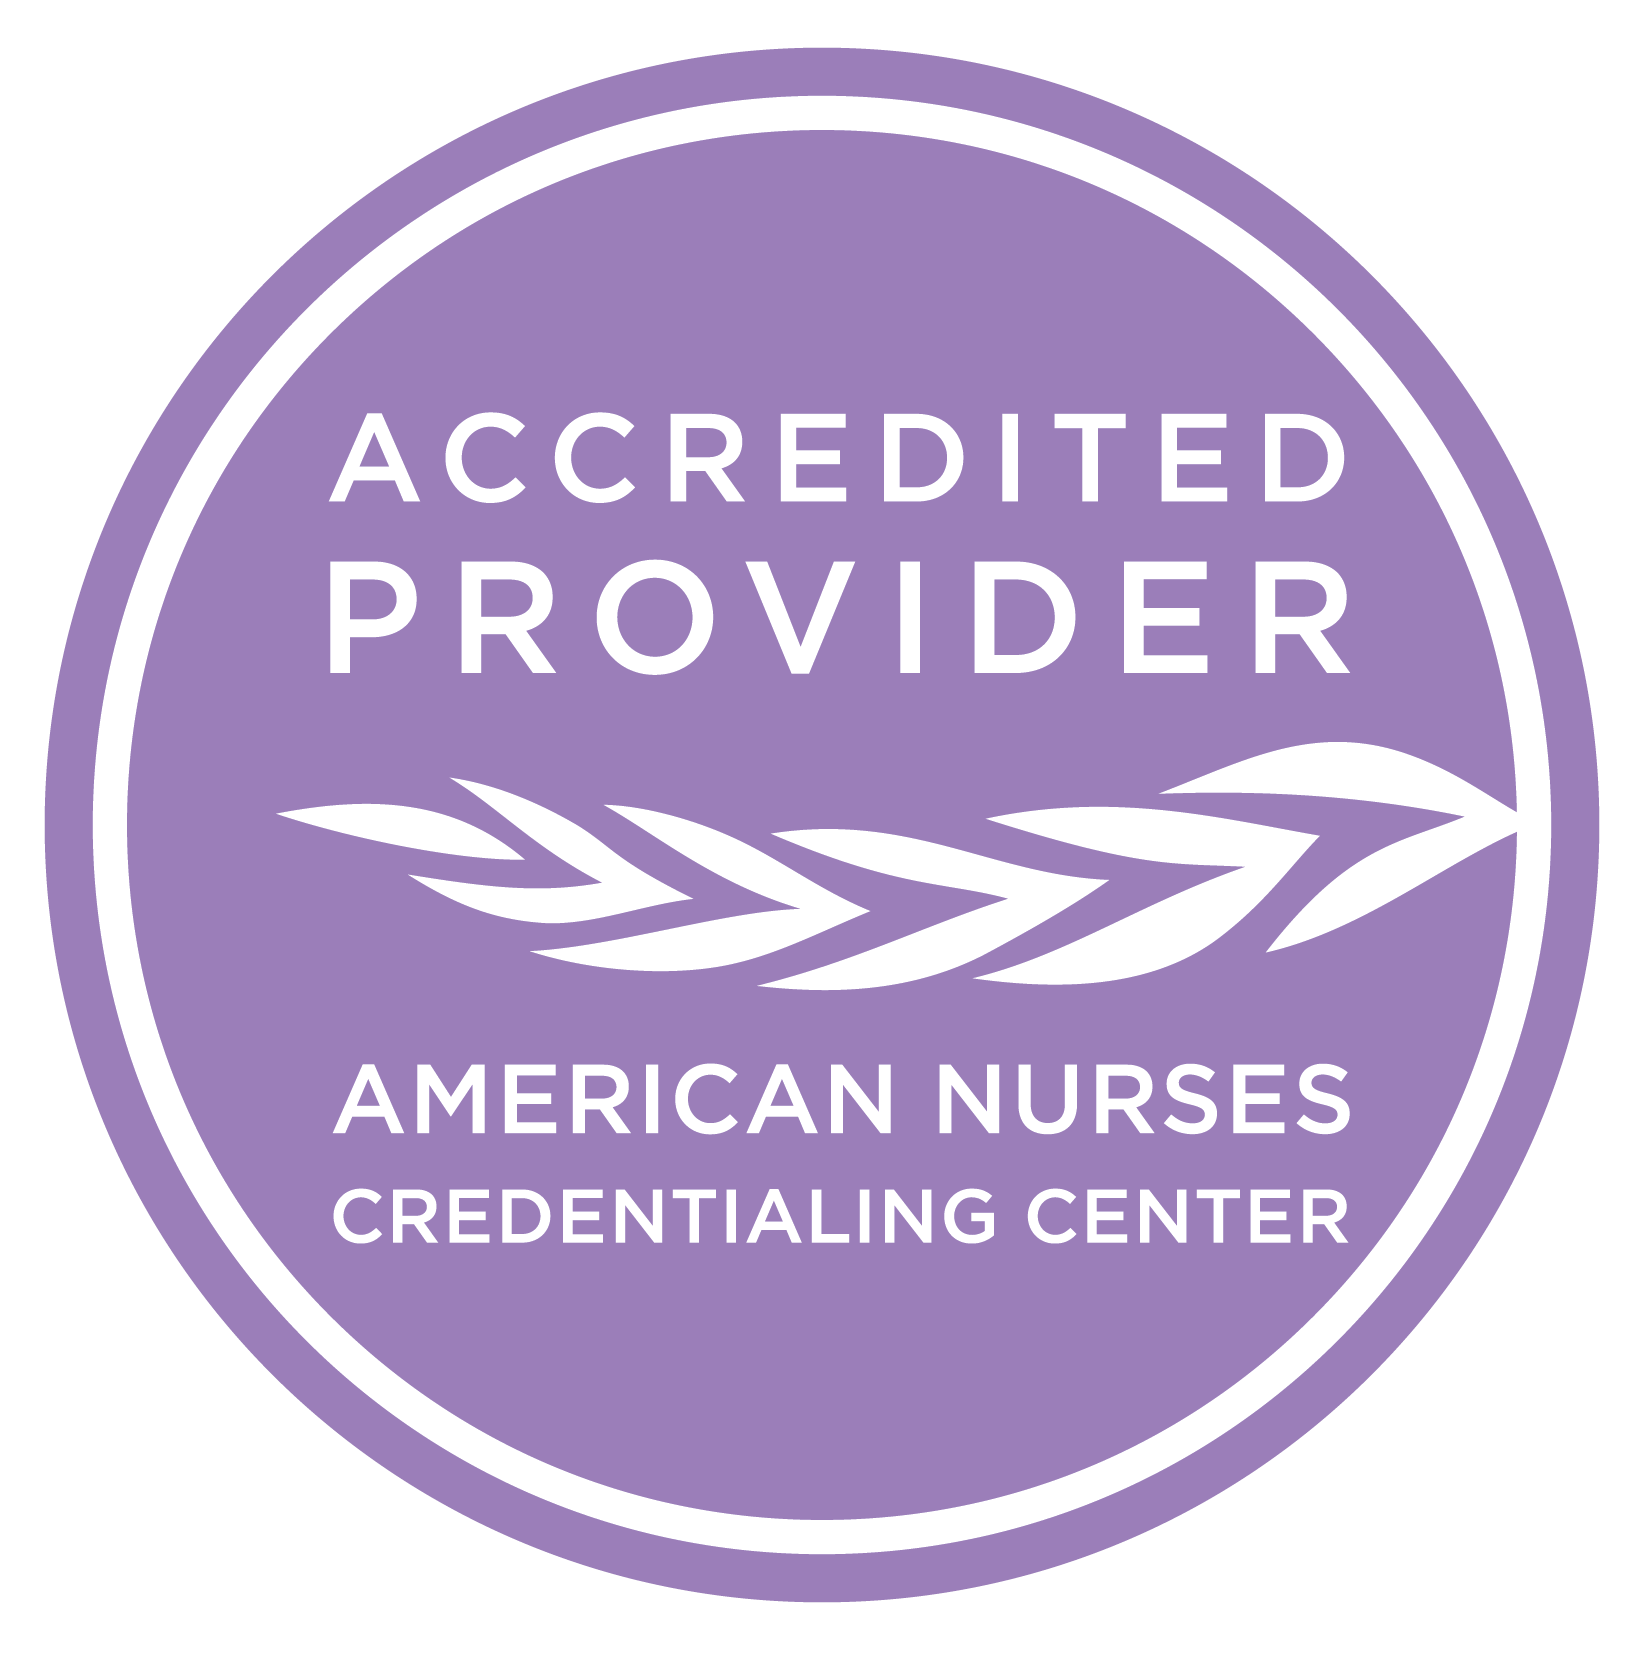 Accreditation seal from the American Nurses Credentialing Center